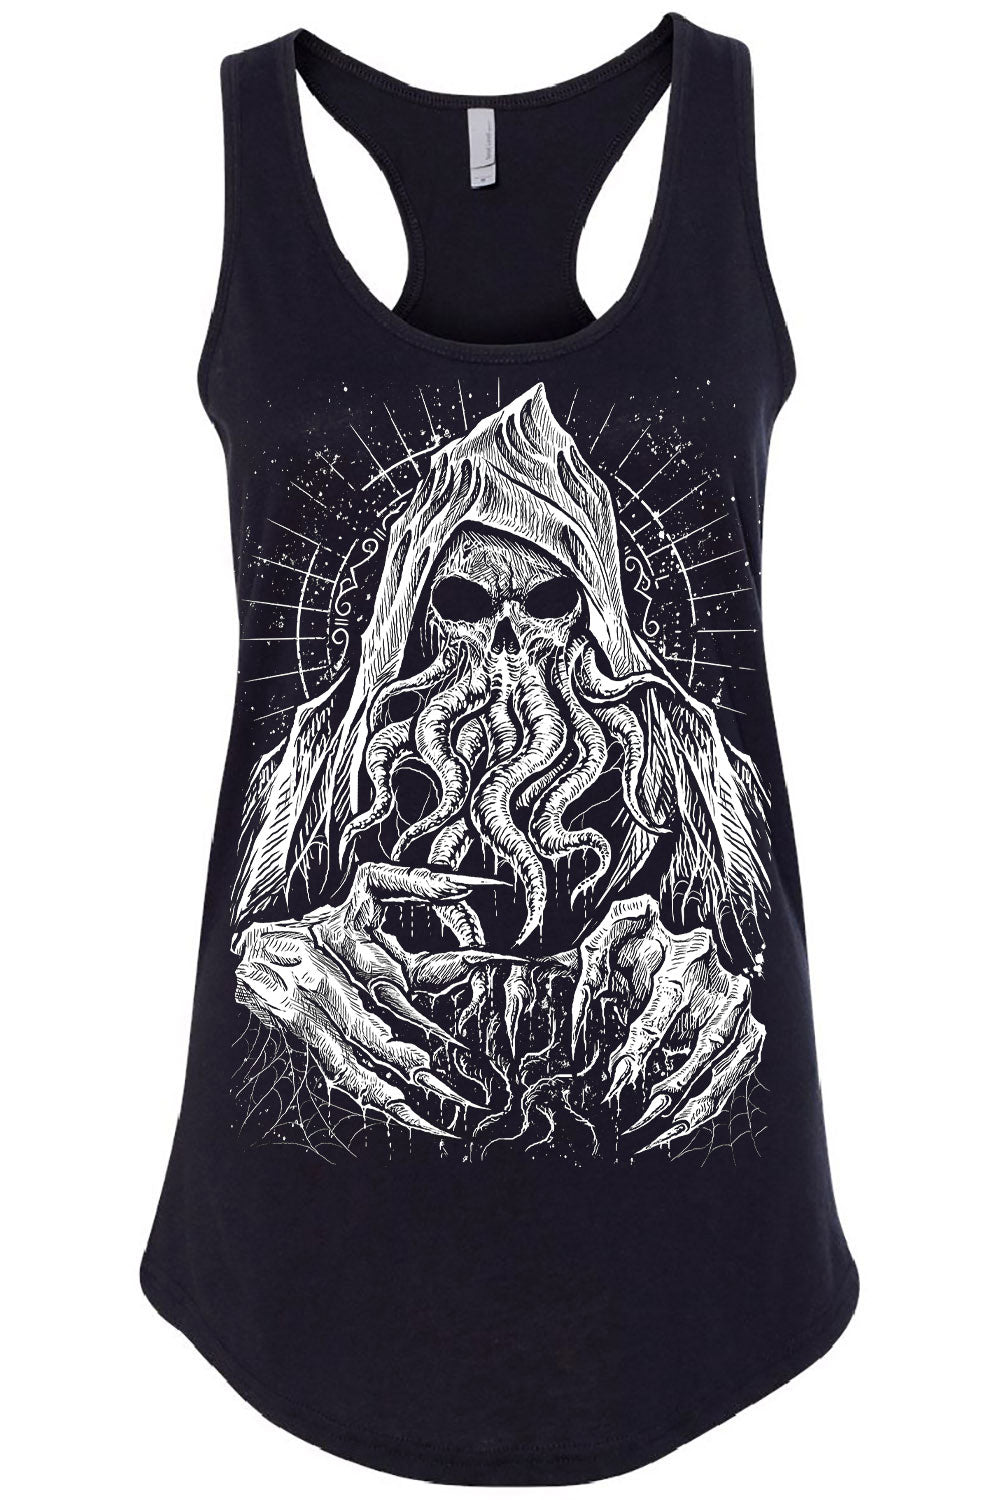 womens occult tank top